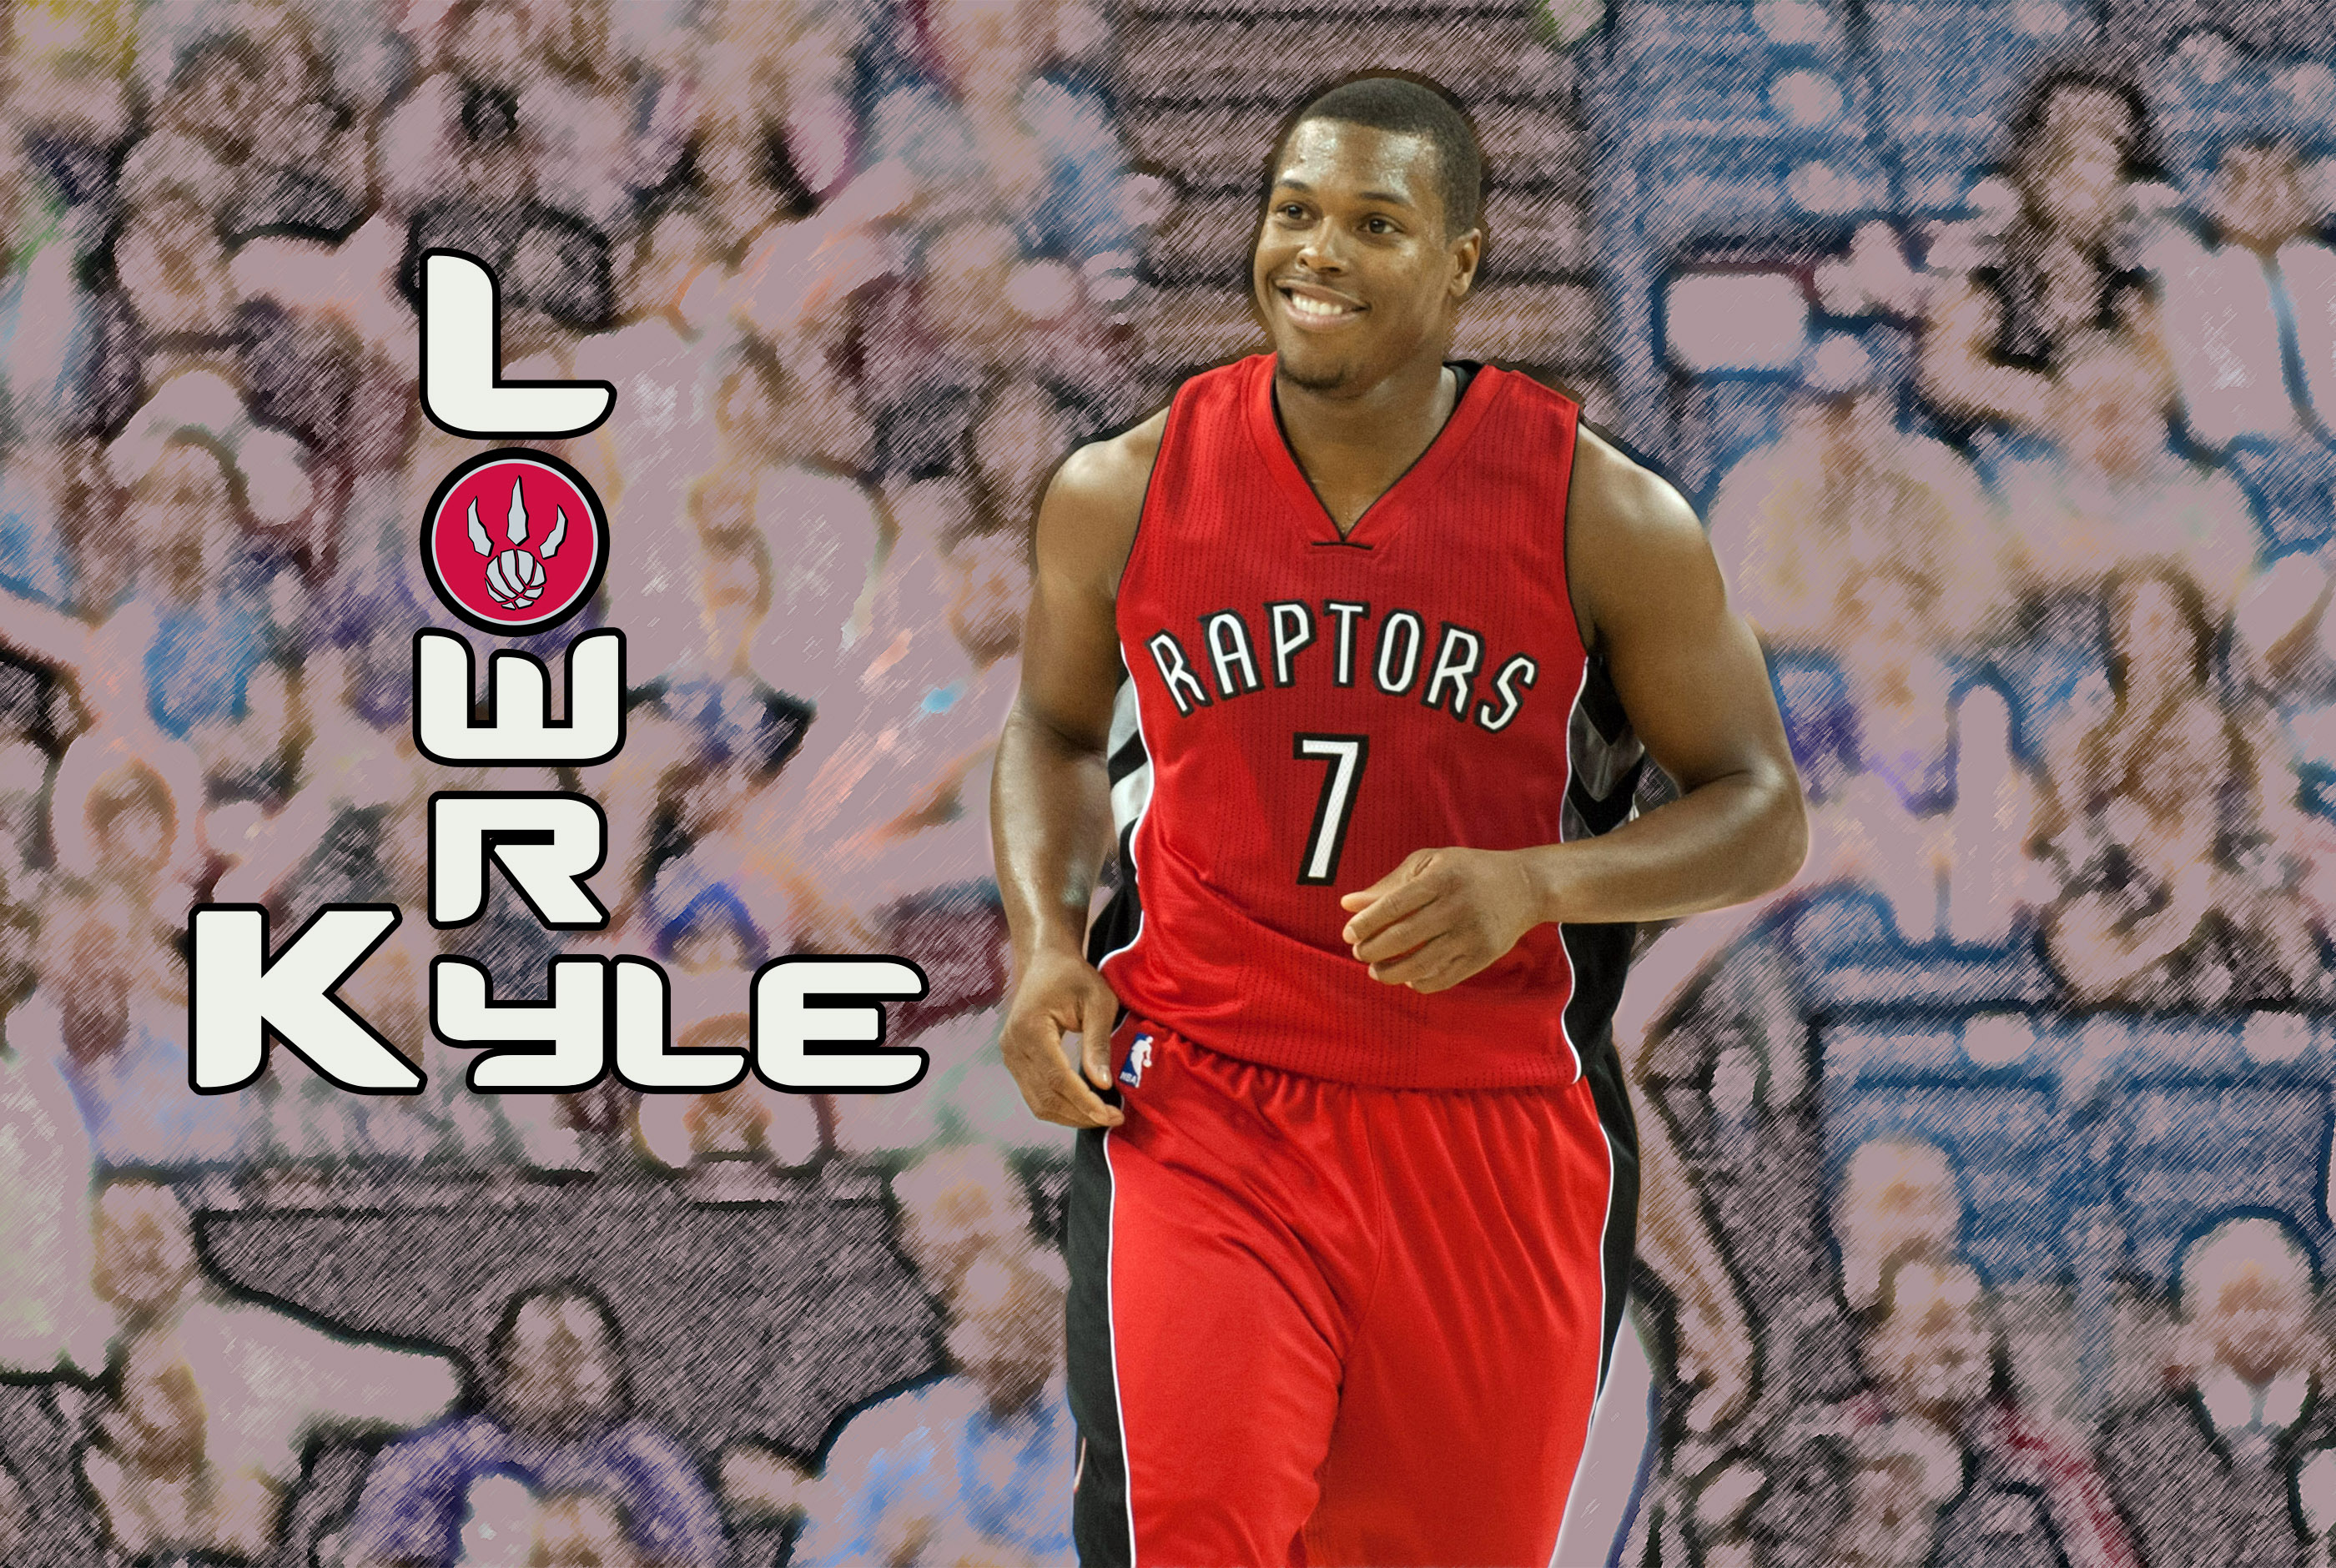 Kyle Lowry - Basketball & Sports Background Wallpapers on Desktop